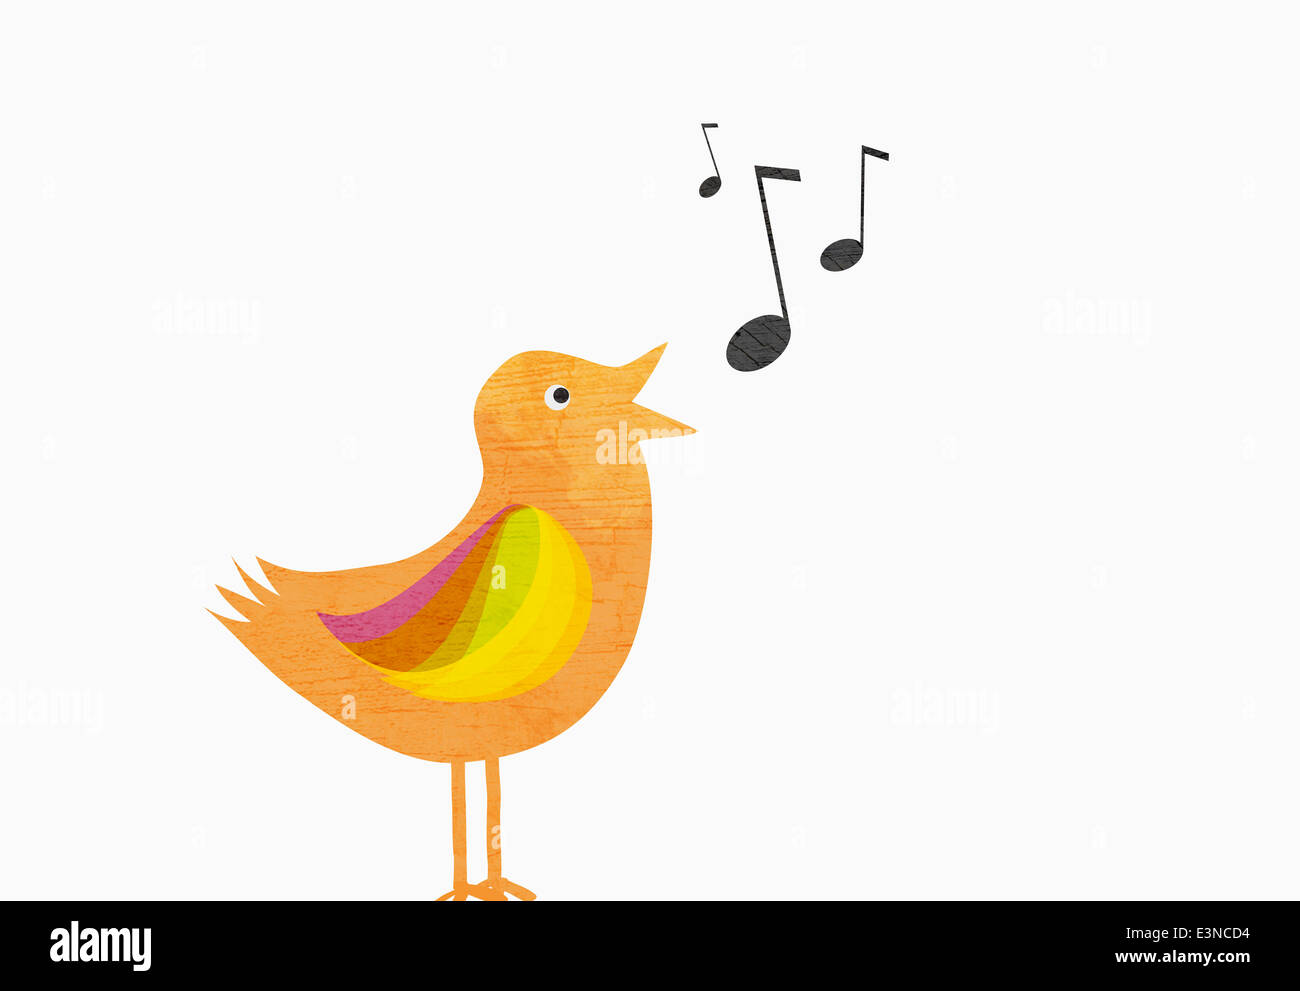 A songbird with musical notes against white background Stock Photo